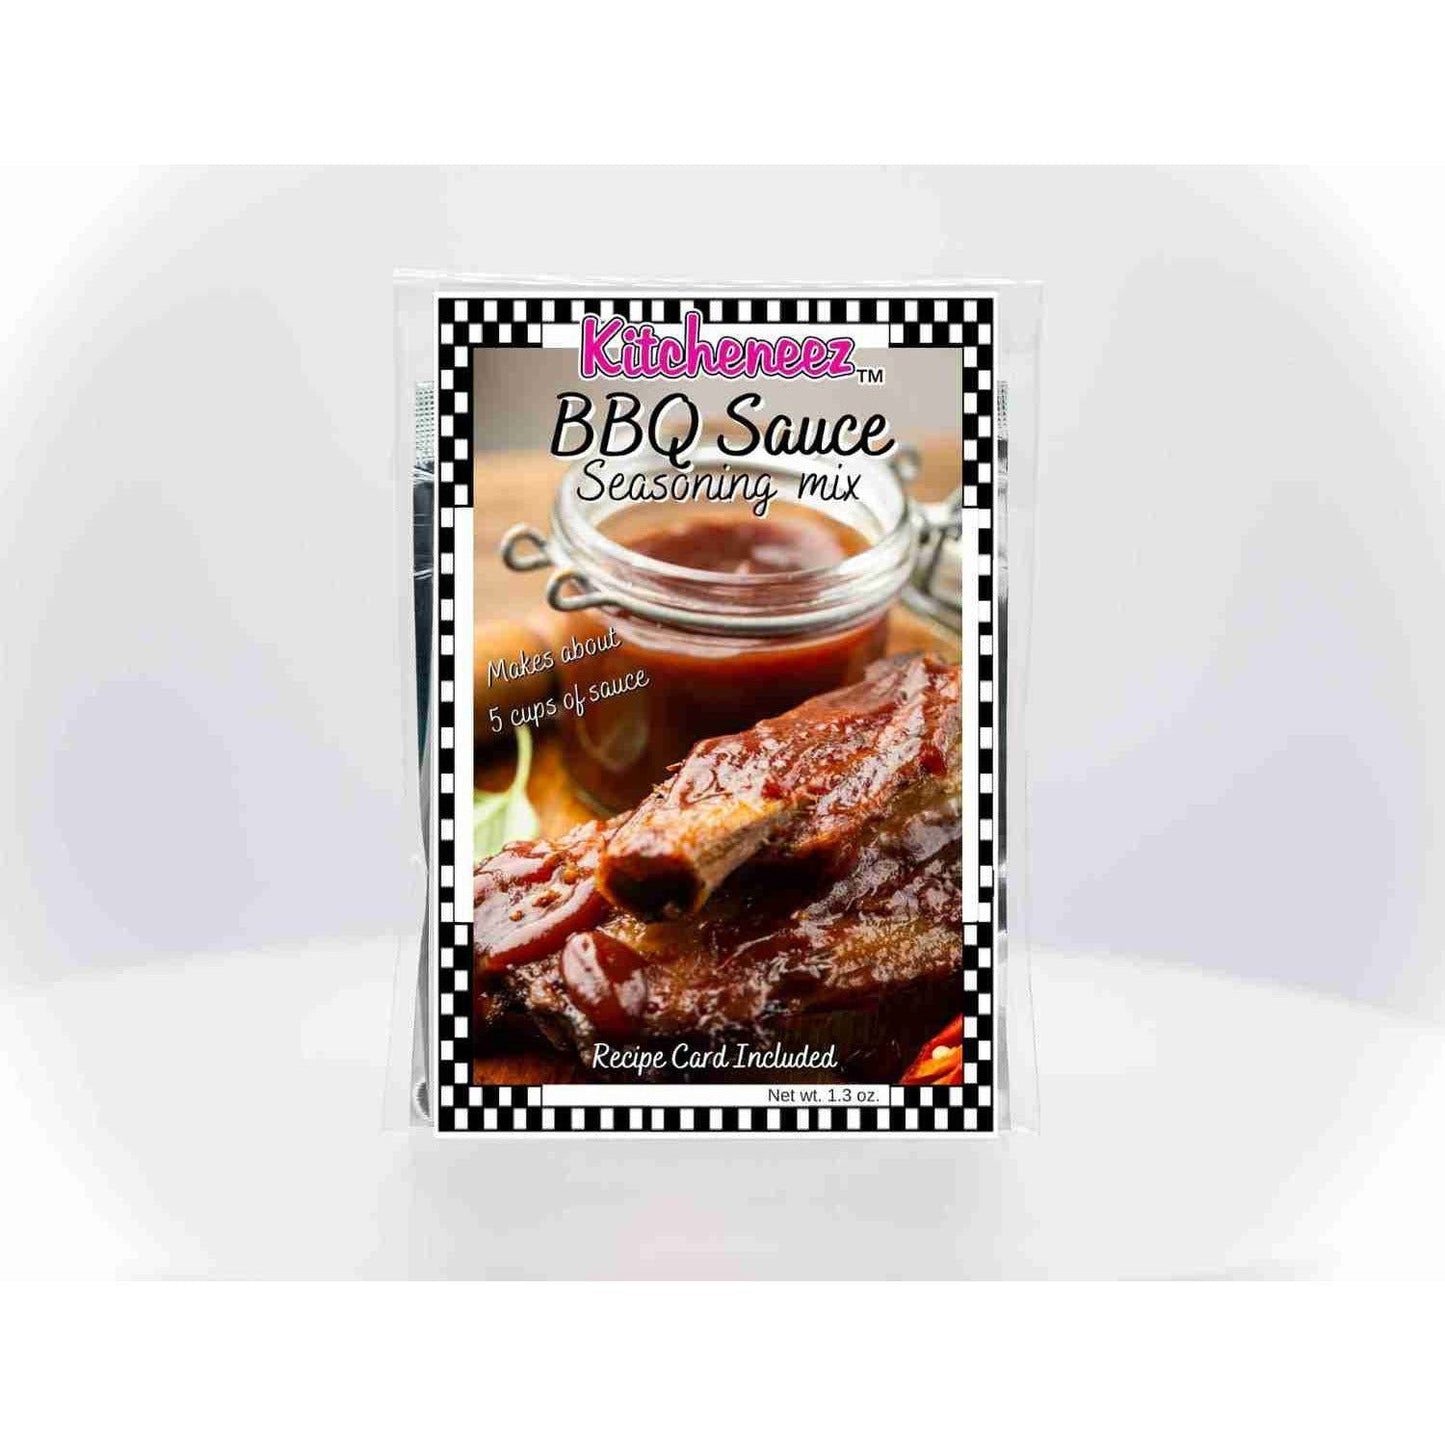 BBQ Sauce mix- Our Favorite!